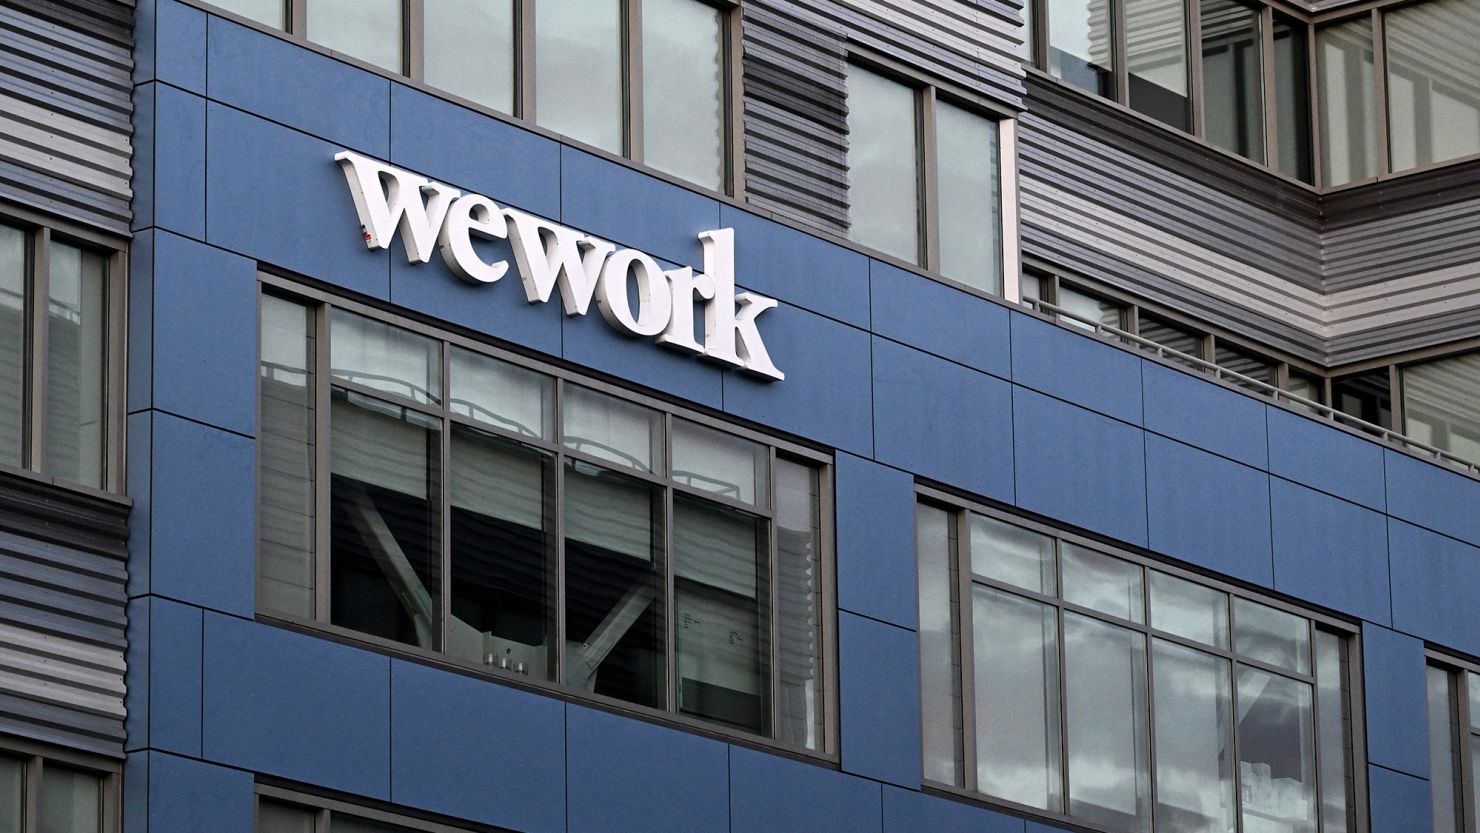 A WeWork office building in Los Angeles, California. The company plans to file for bankruptcy as early as next week, the WSJ and Reuters have reported.